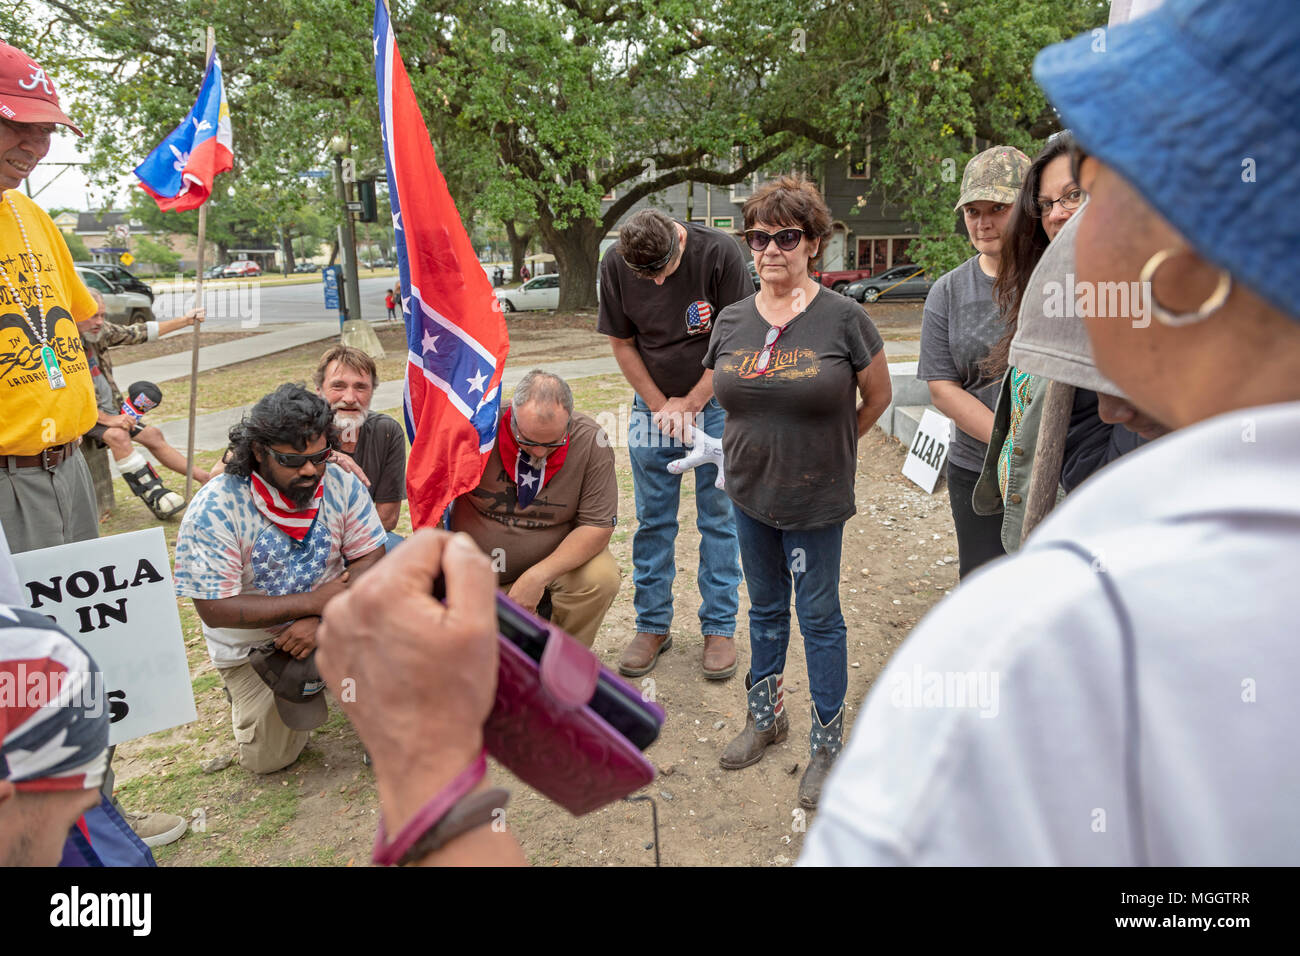 New Orleans, Louisiana - Carrying various Confederate flags, a small group prays at the site where a statue of Jefferson Davis was removed in 2017. Je Stock Photo